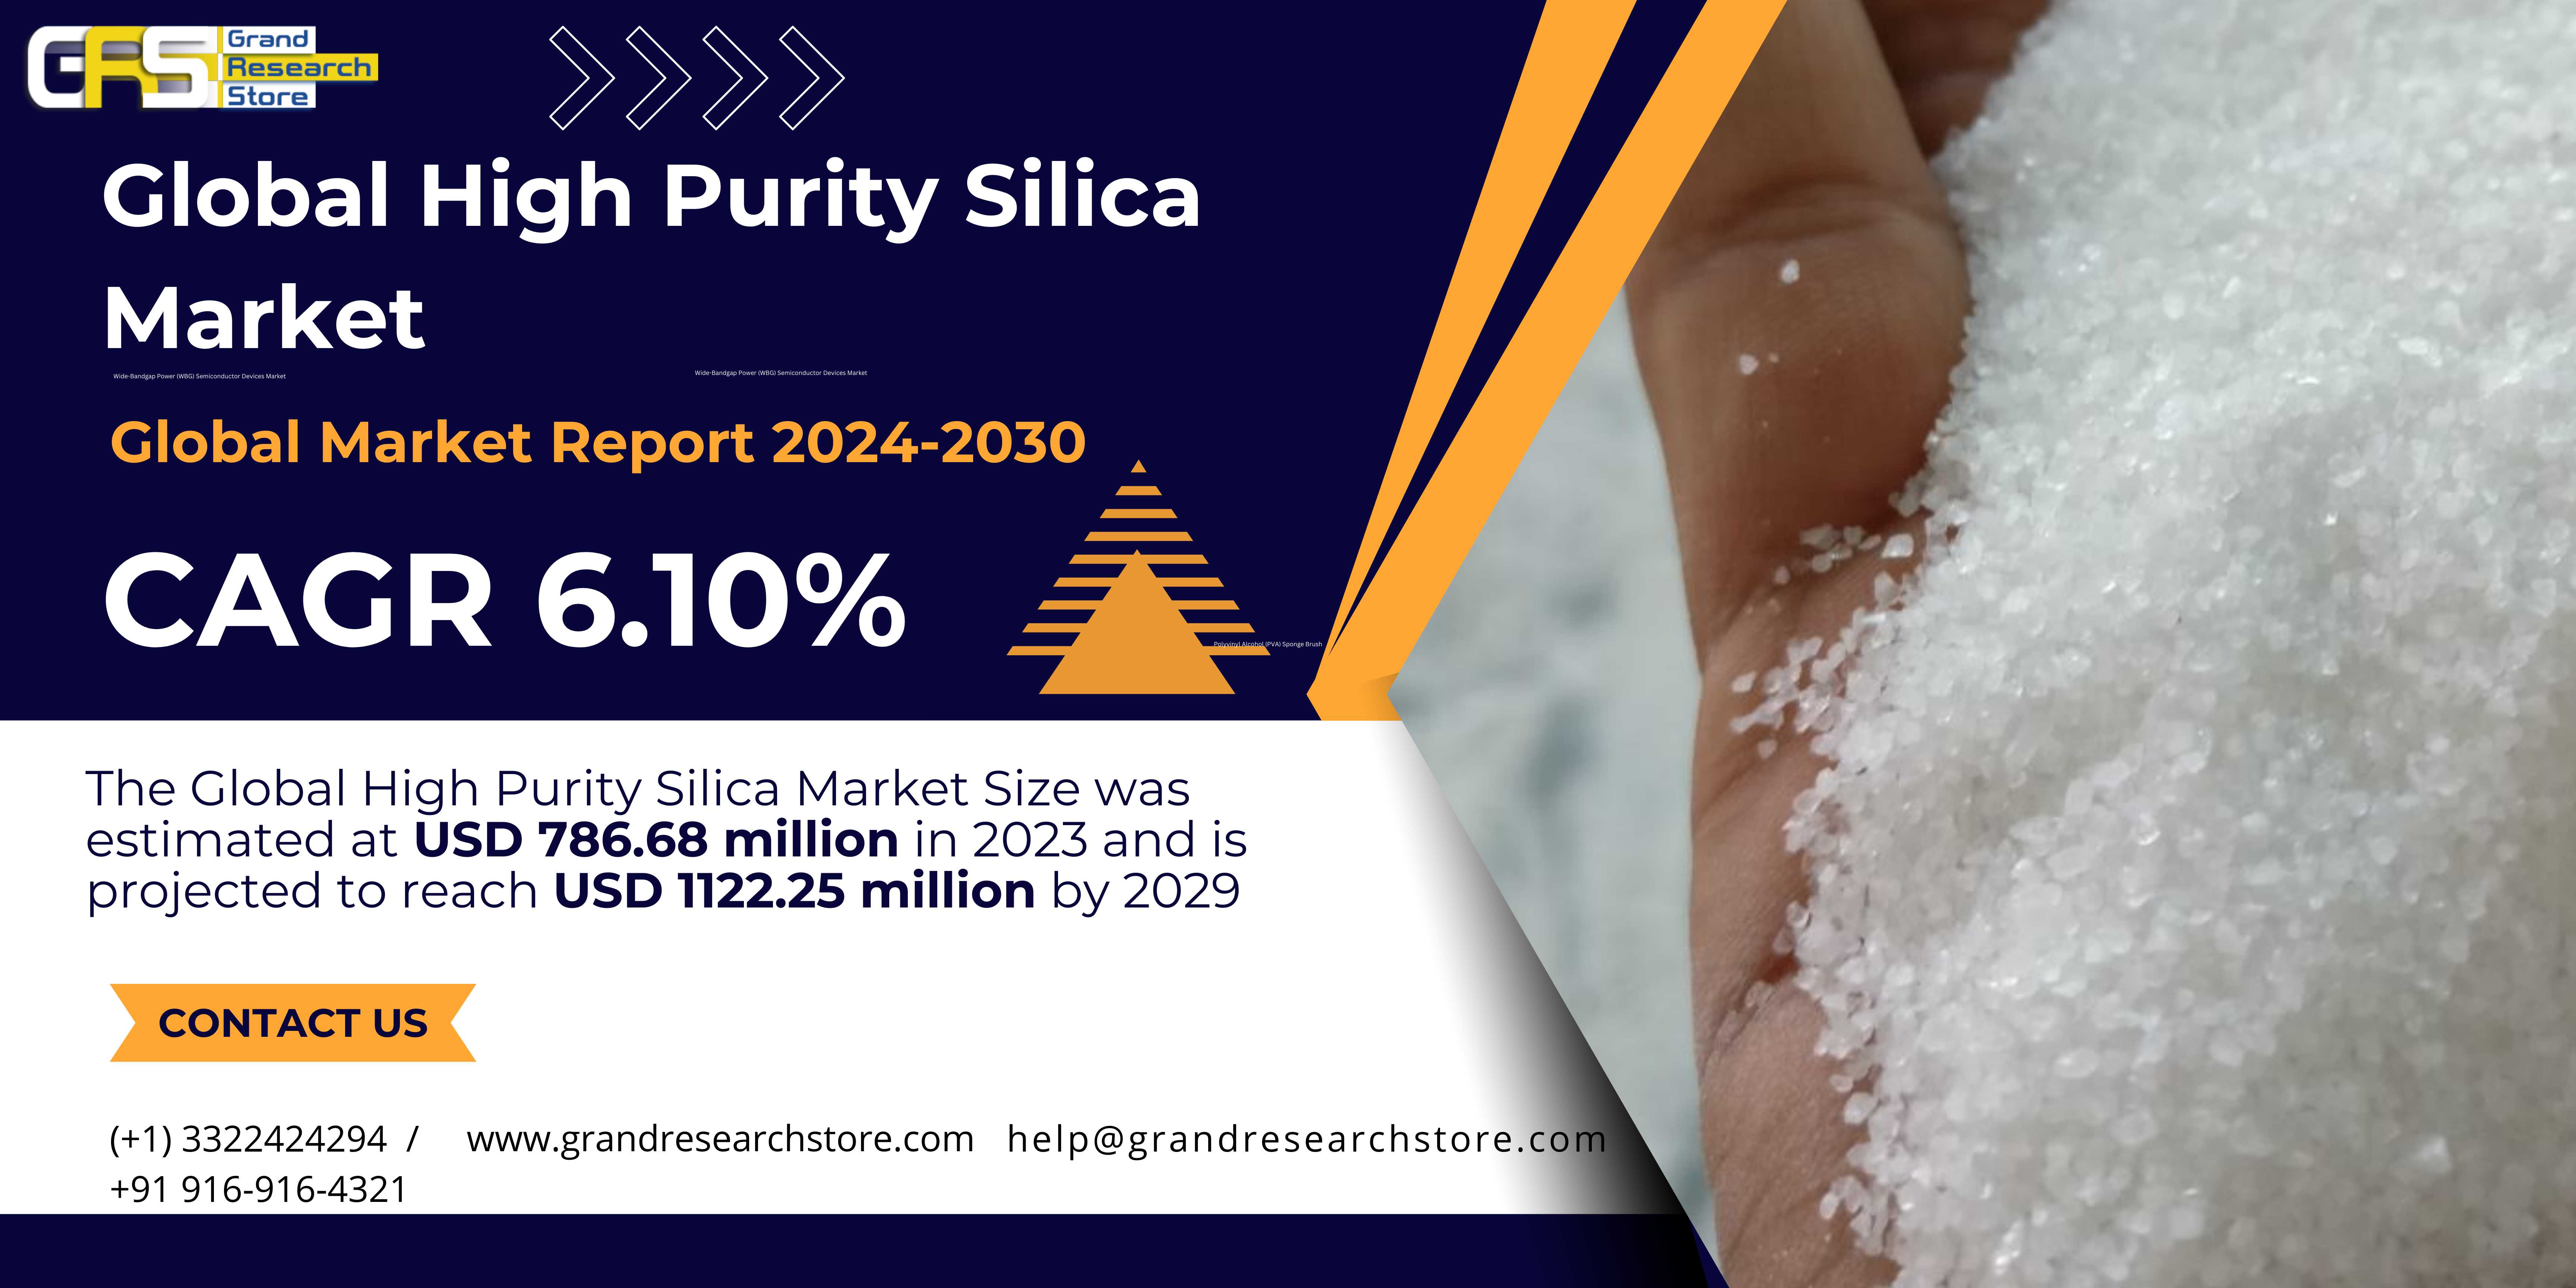 Global High Purity Silica Market Research Report 2..